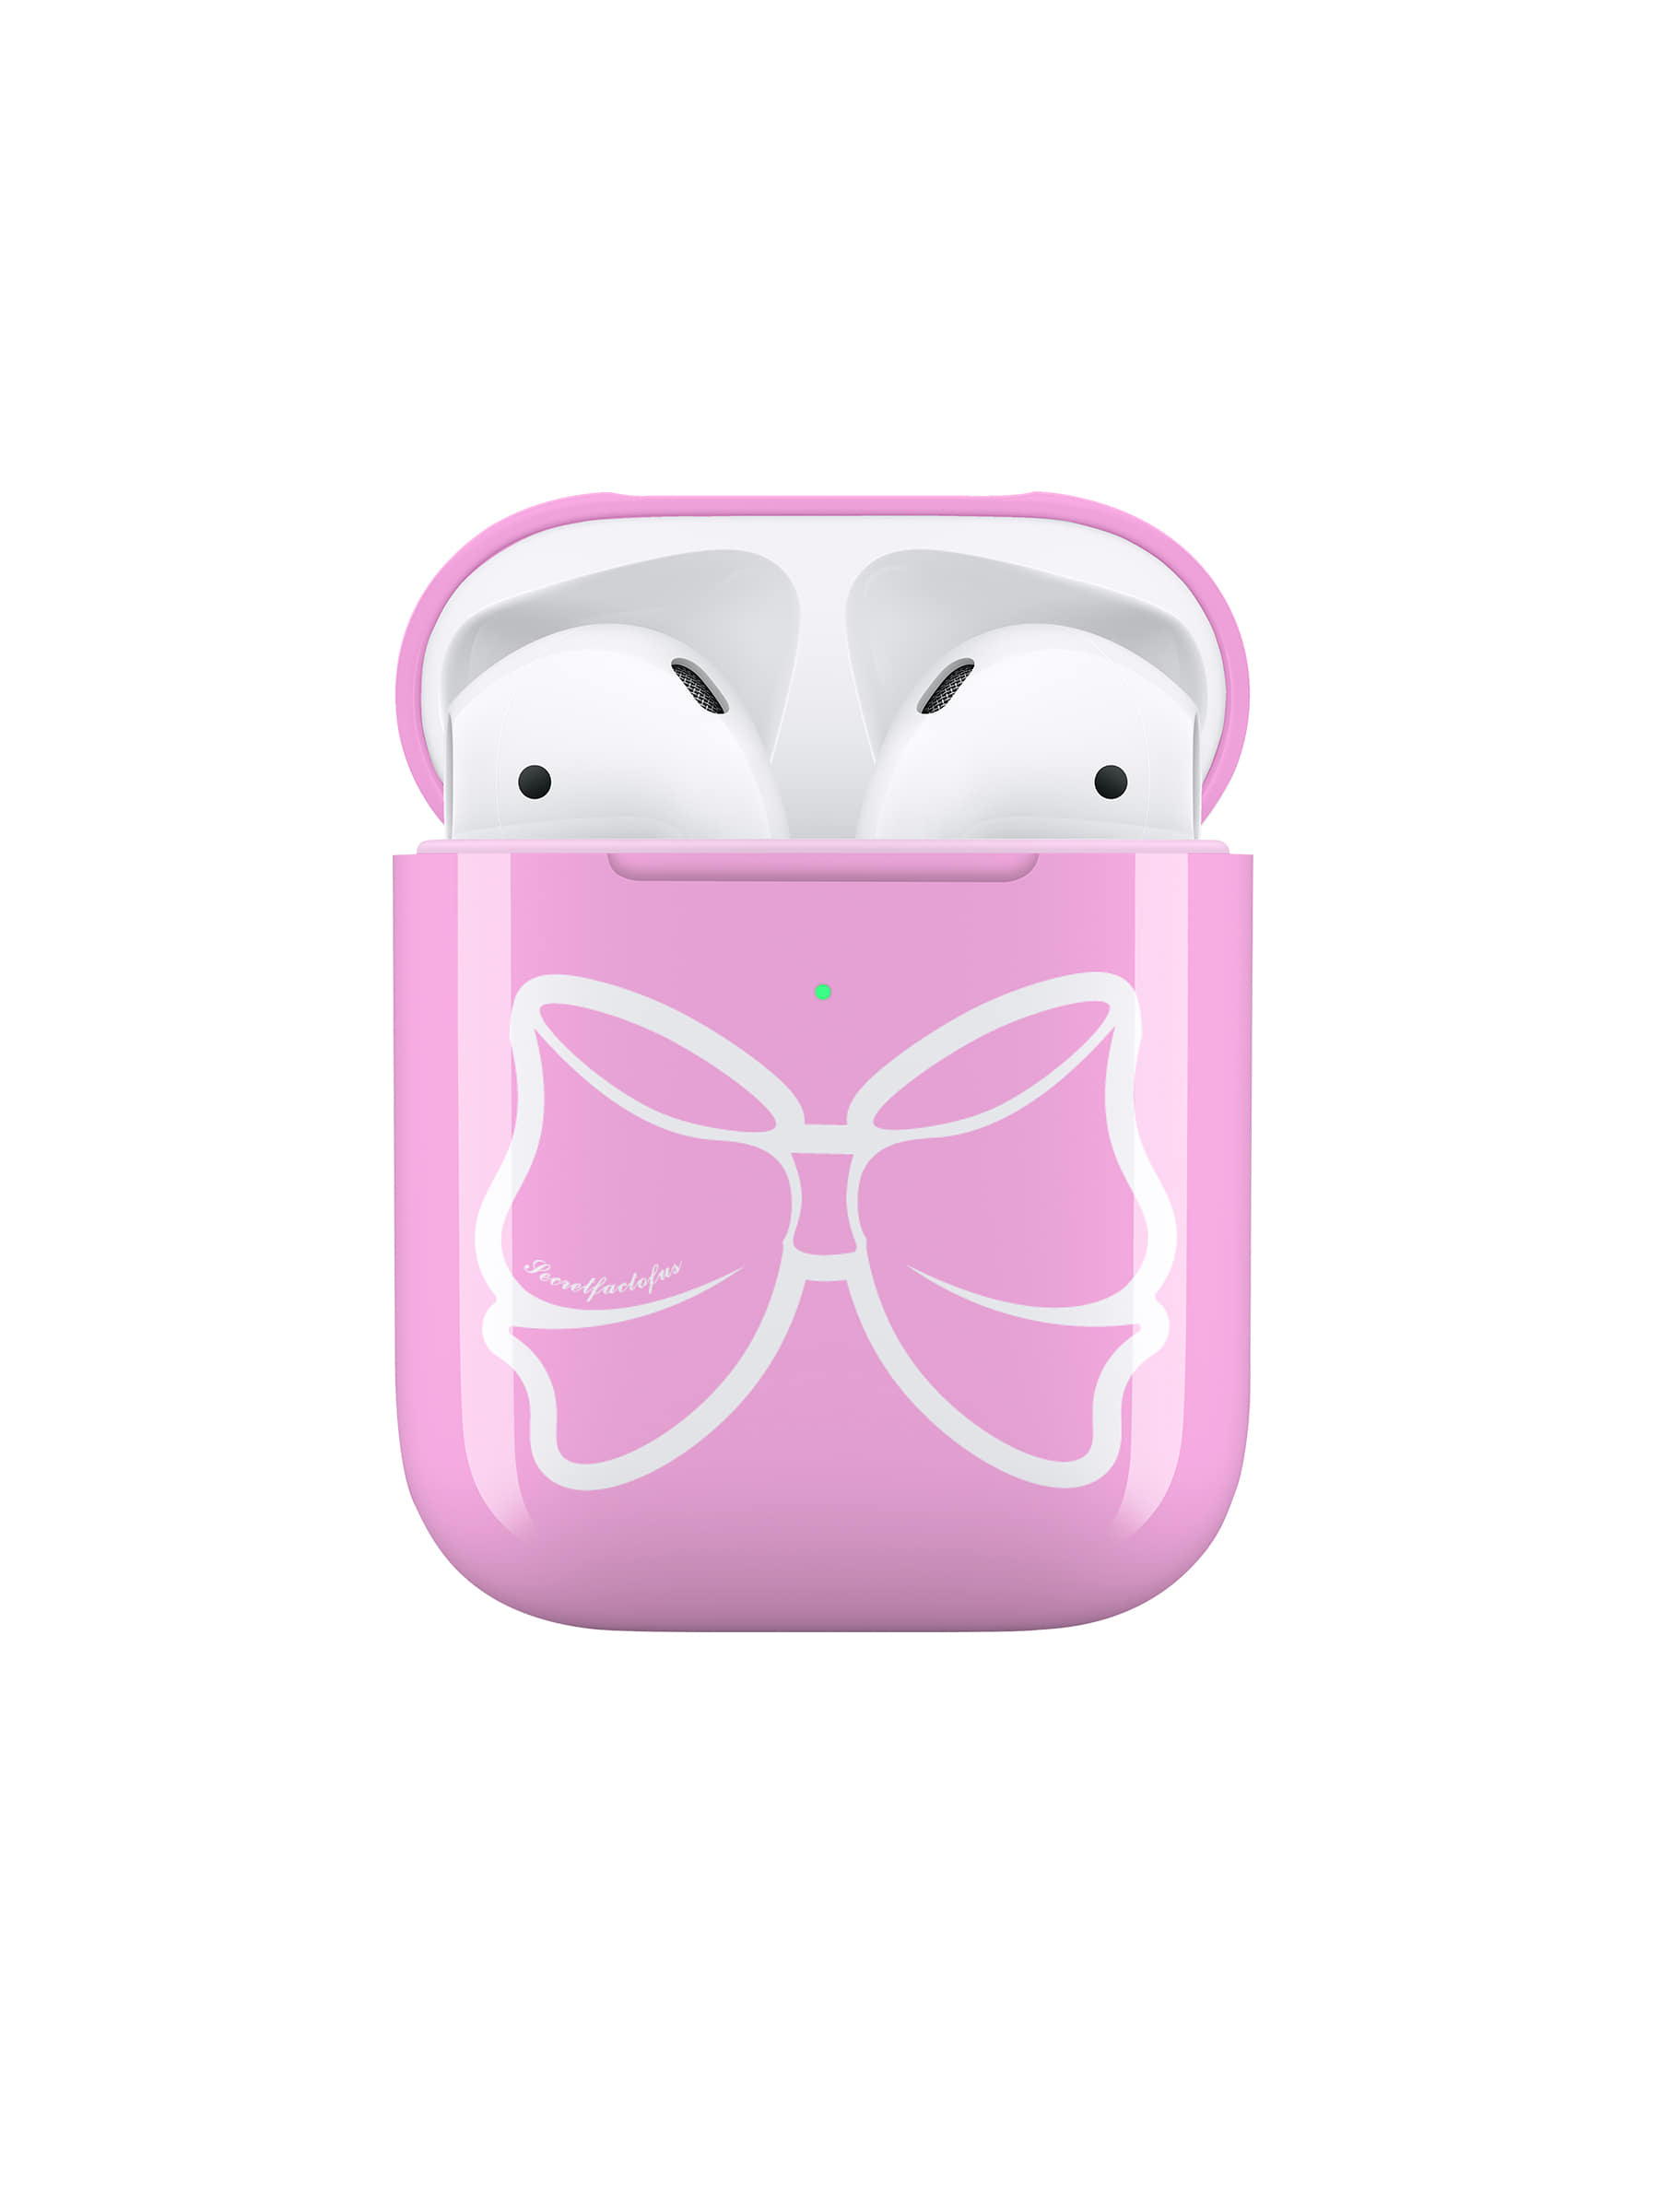 My cutie chubby ribbon [ Pink : Airpods ]